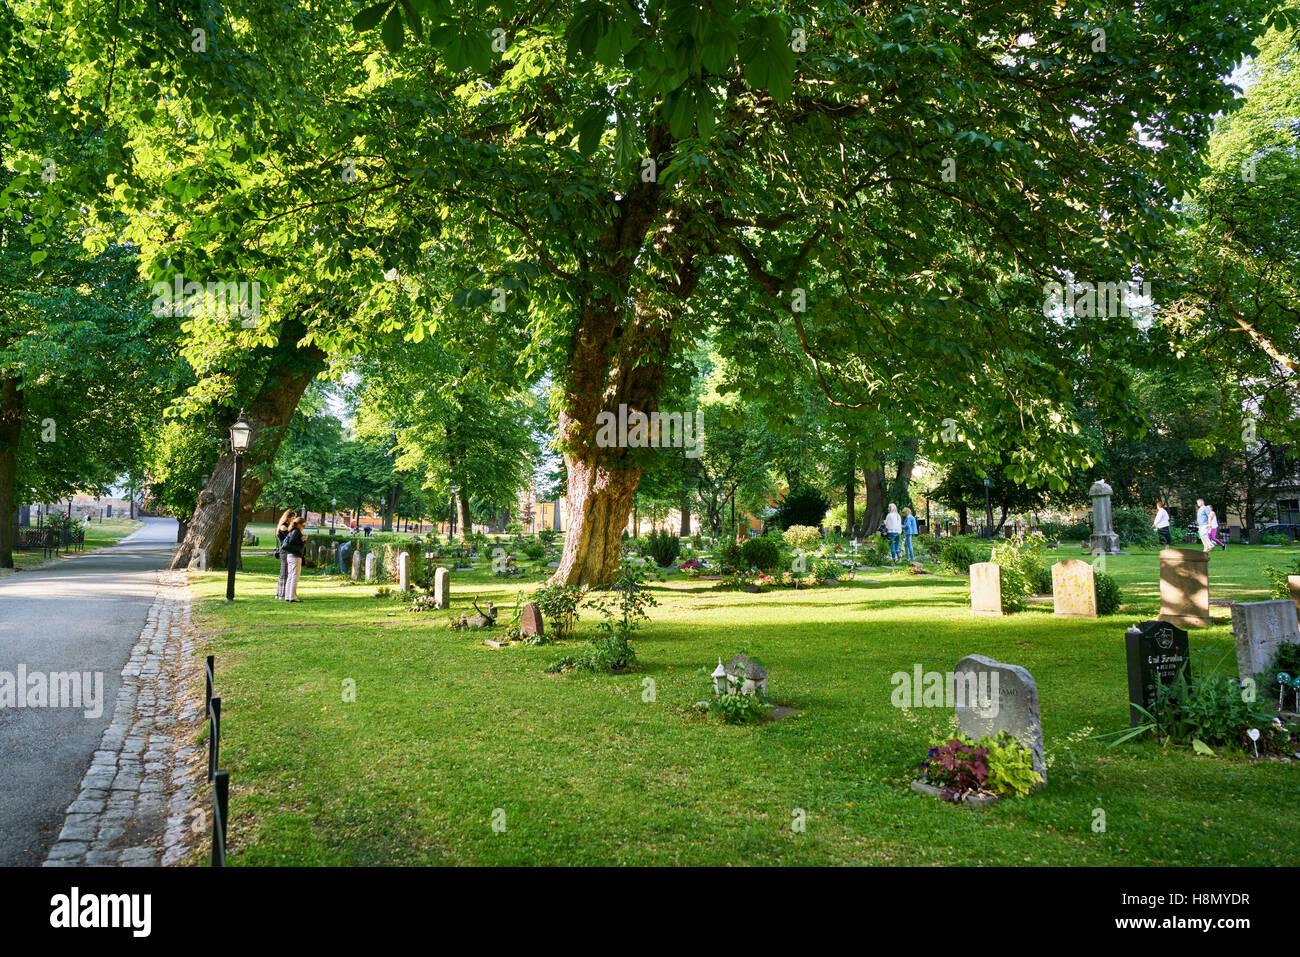 Green grass and trees in cemetery Stock Photo